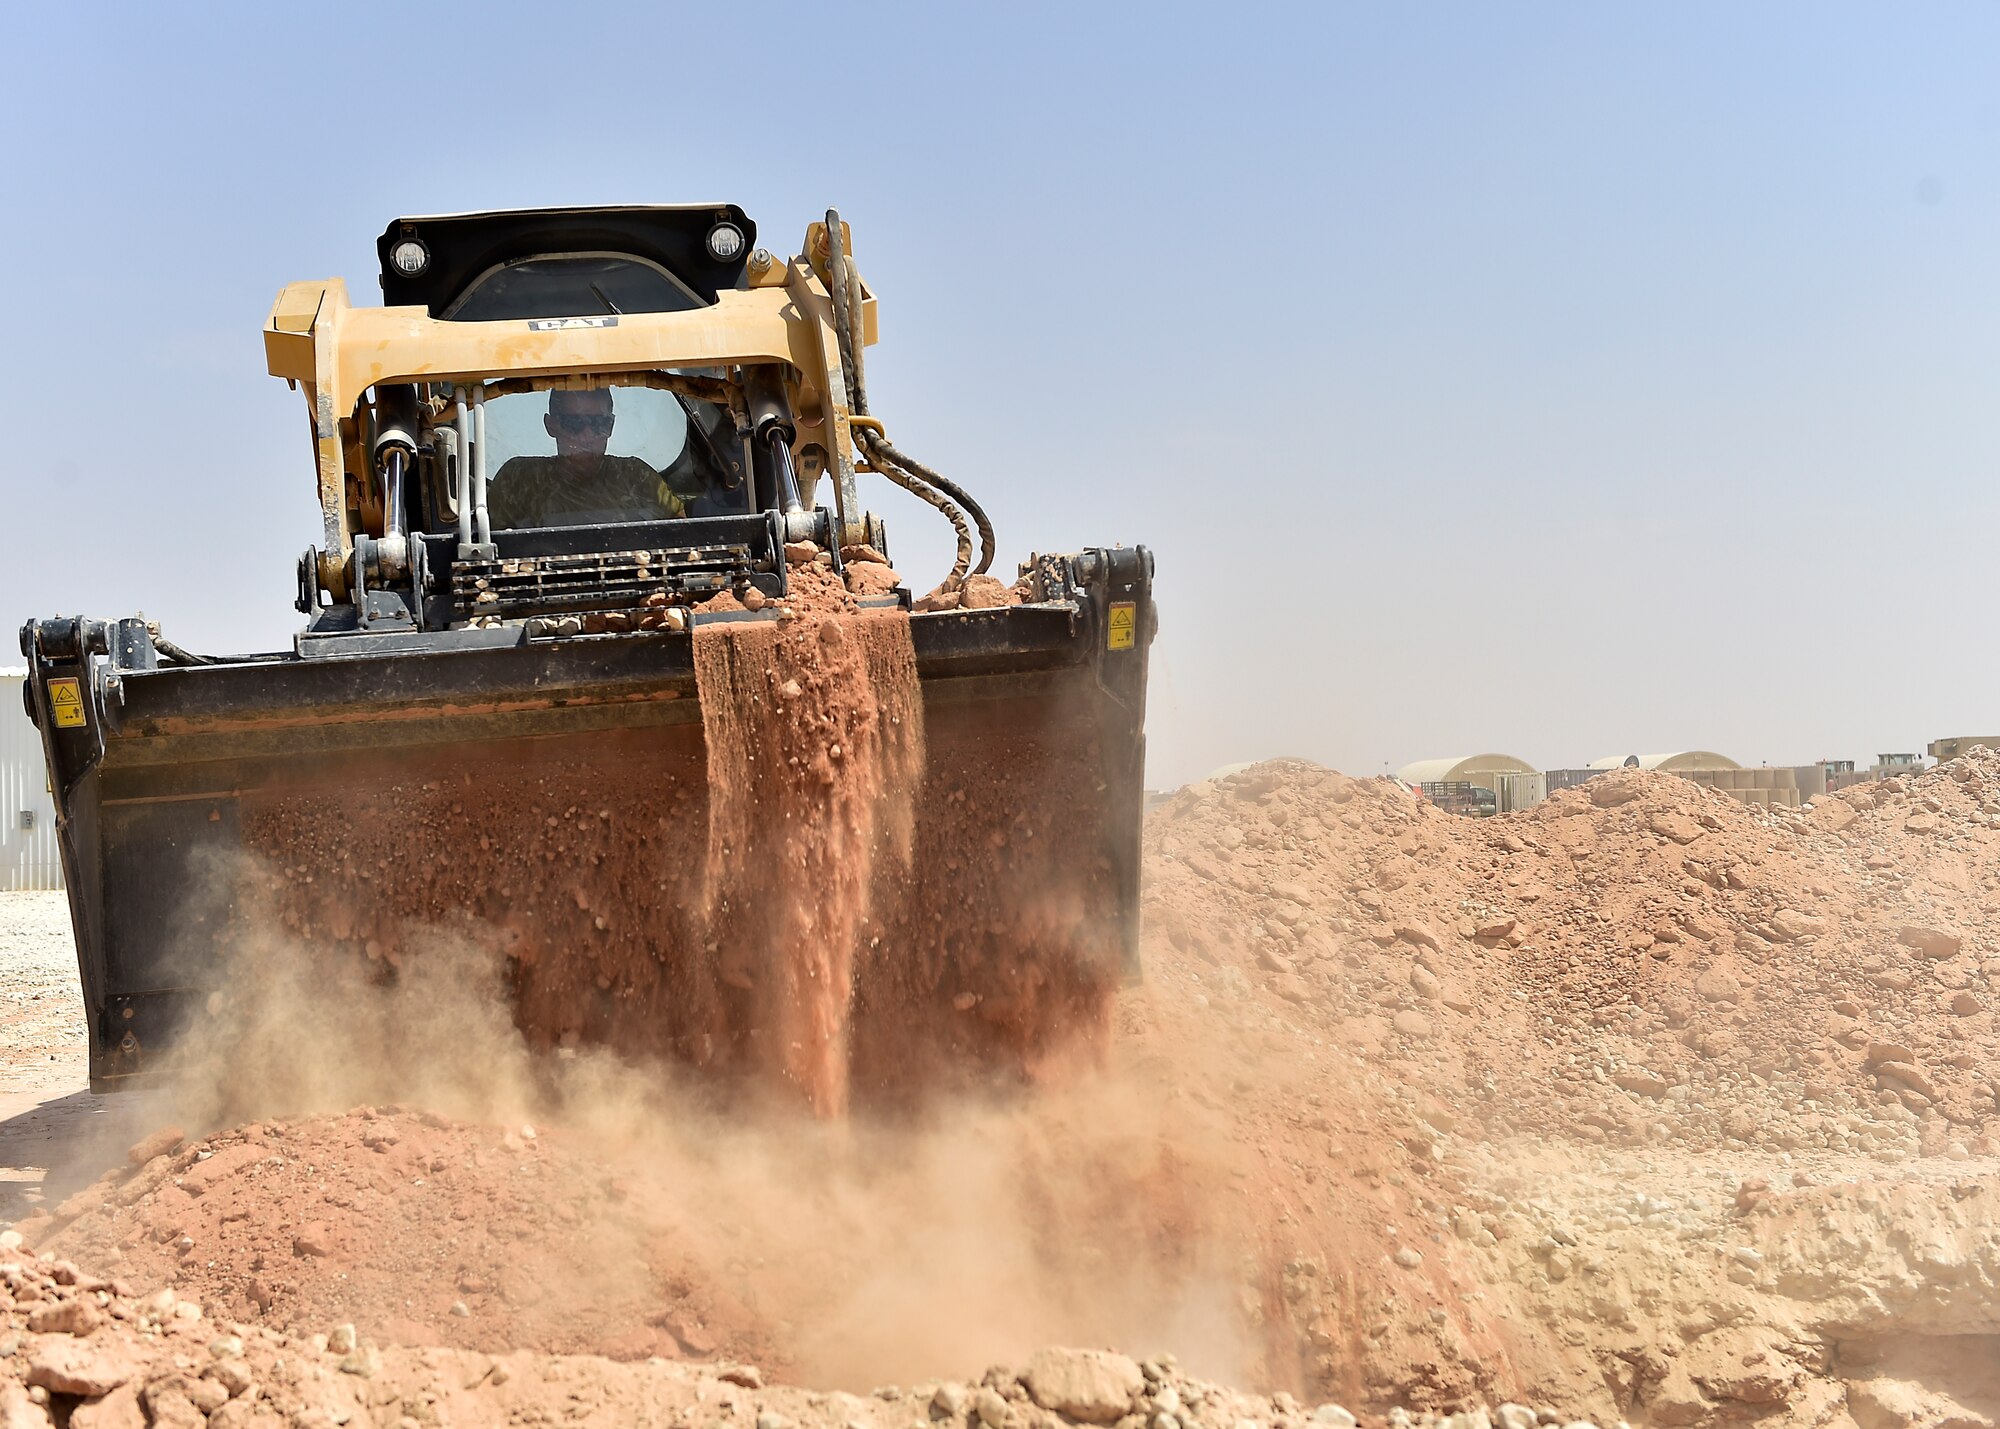 Airmen from the 378th Expeditionary Civil Engineer Squadron construct water and sewer lines at Prince Sultan Air Base, Kingdom of Saudi Arabia, July 28th, 2020.